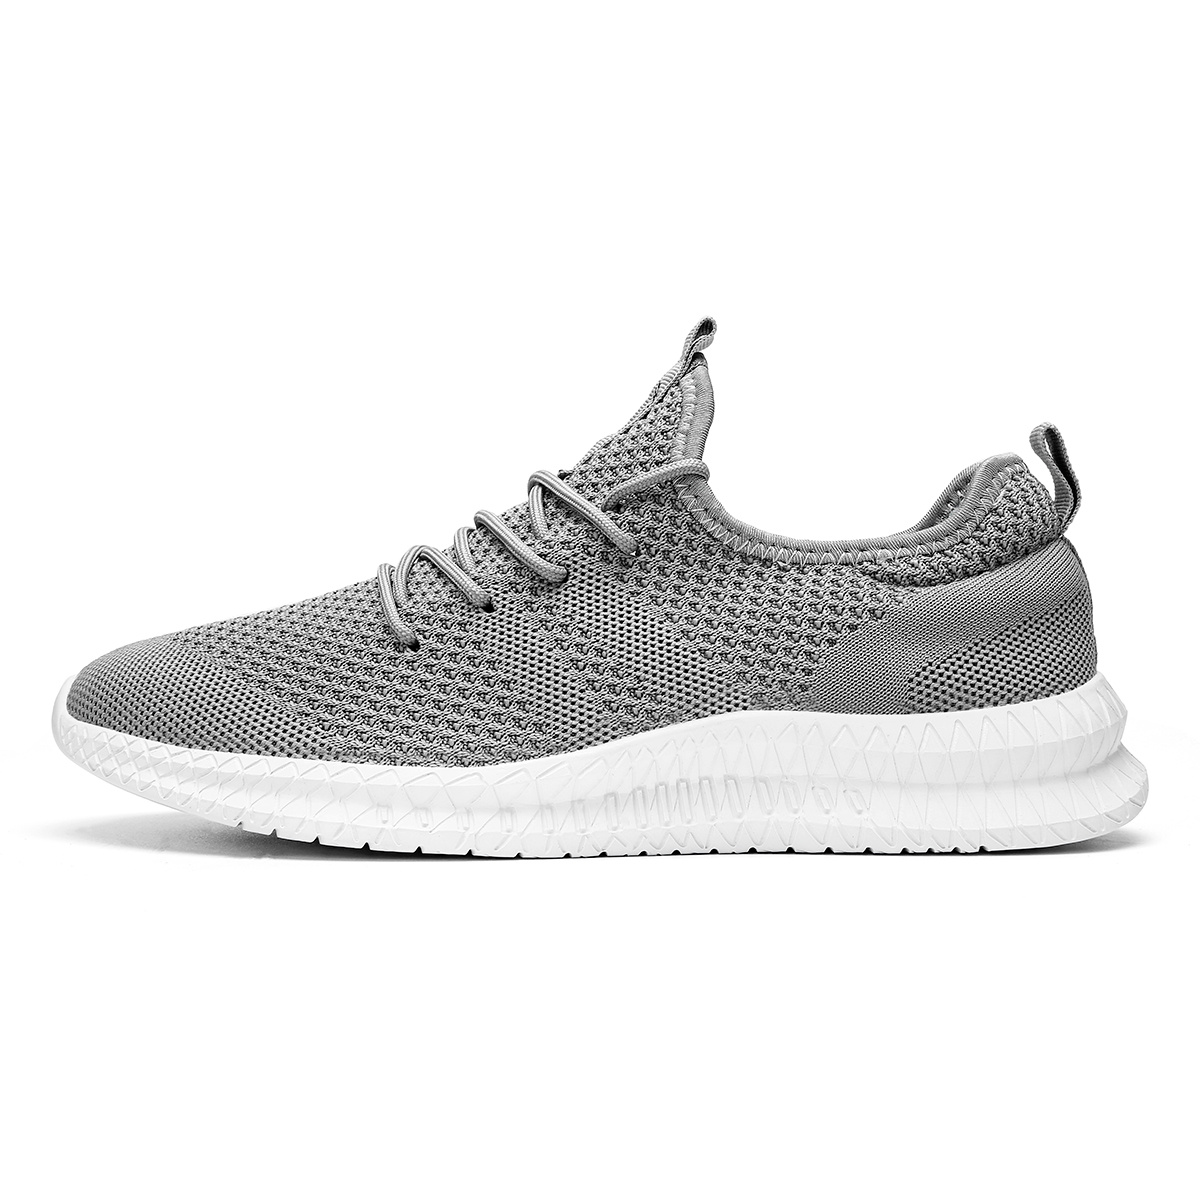 mens running shoes couple knit breathable lightweight running shoes outdoor athletic walking sneakers spring and summer details 8